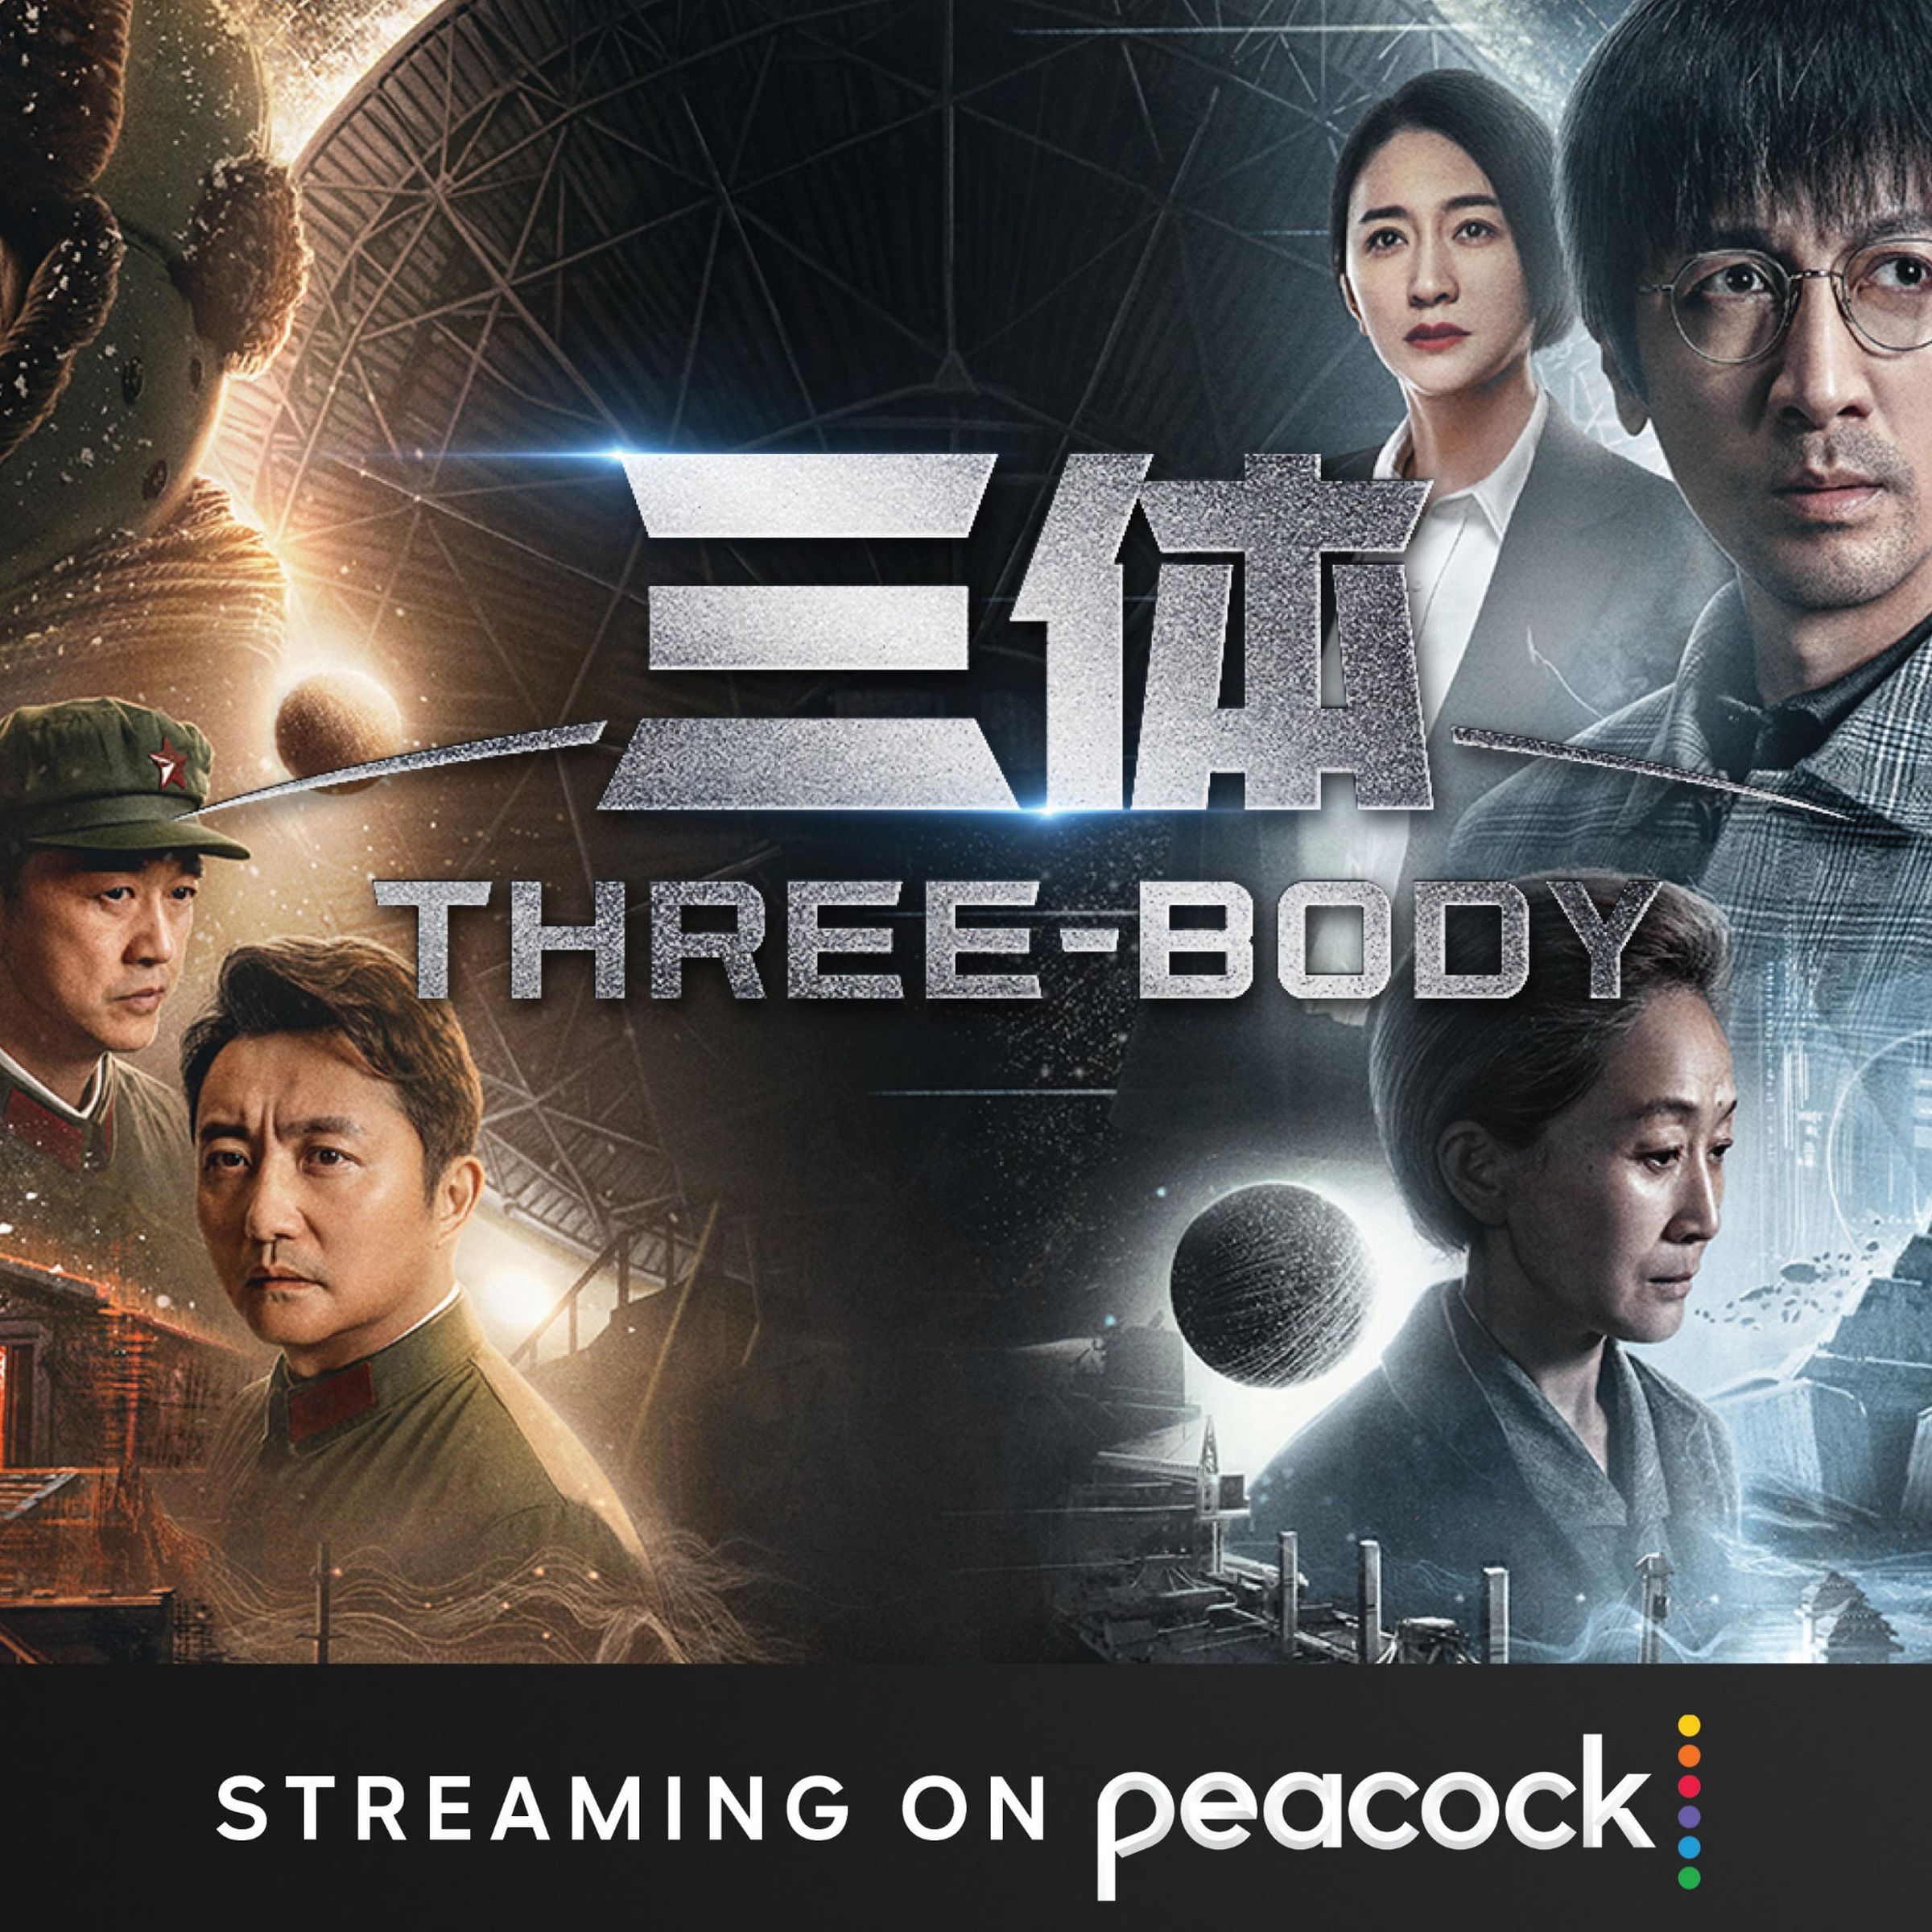 Promotional art for the sci-fi series Three-Body on Peacock.